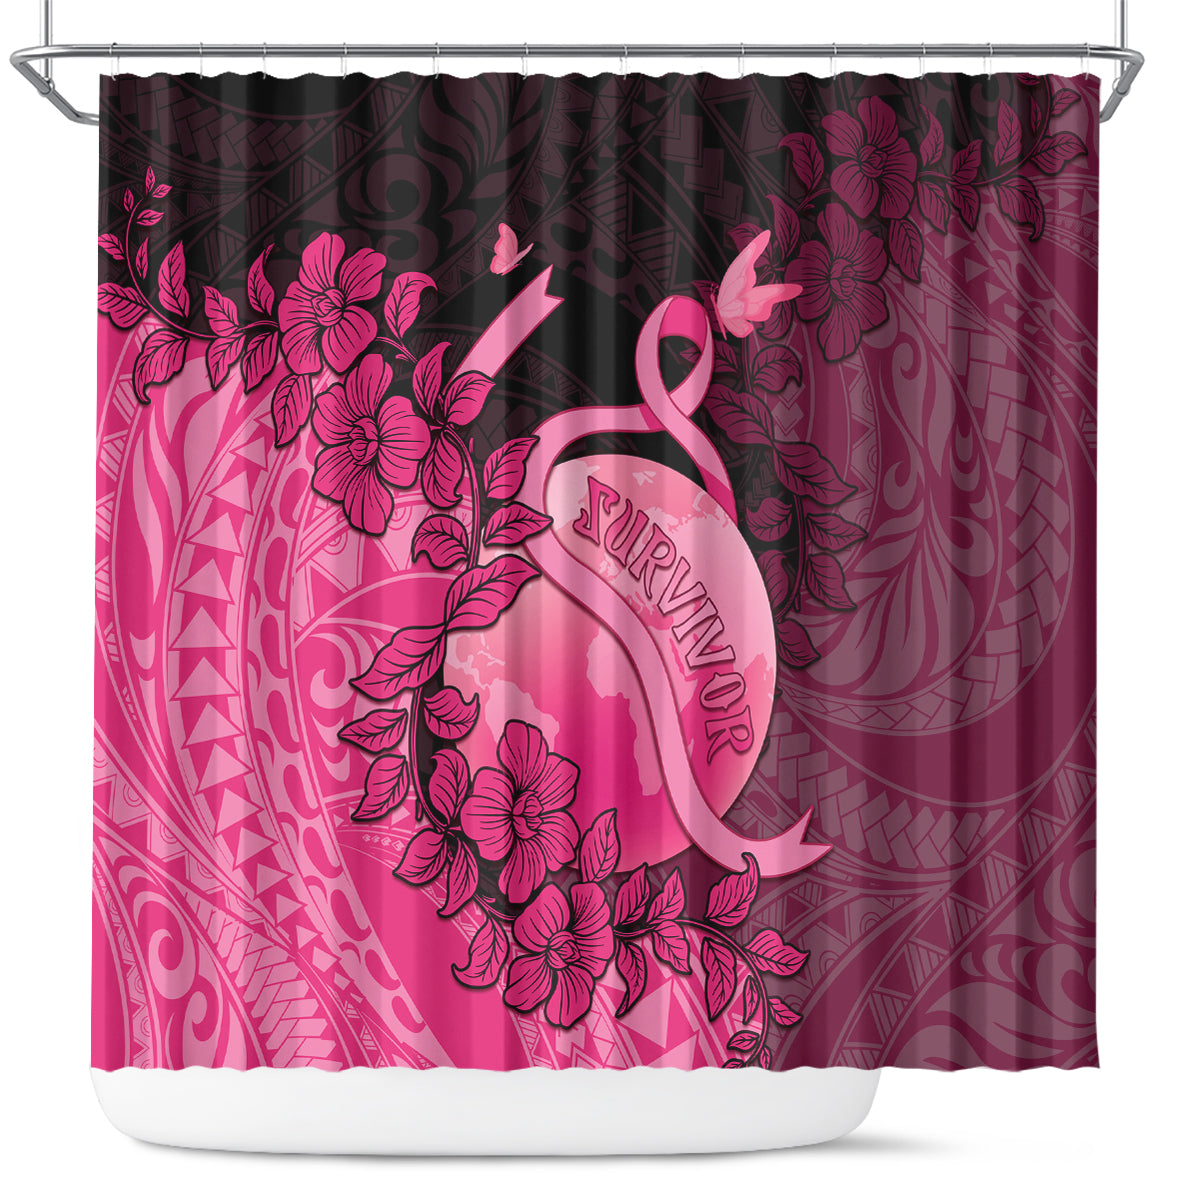 Cancer Fighter Shower Curtain I Beat Cancer